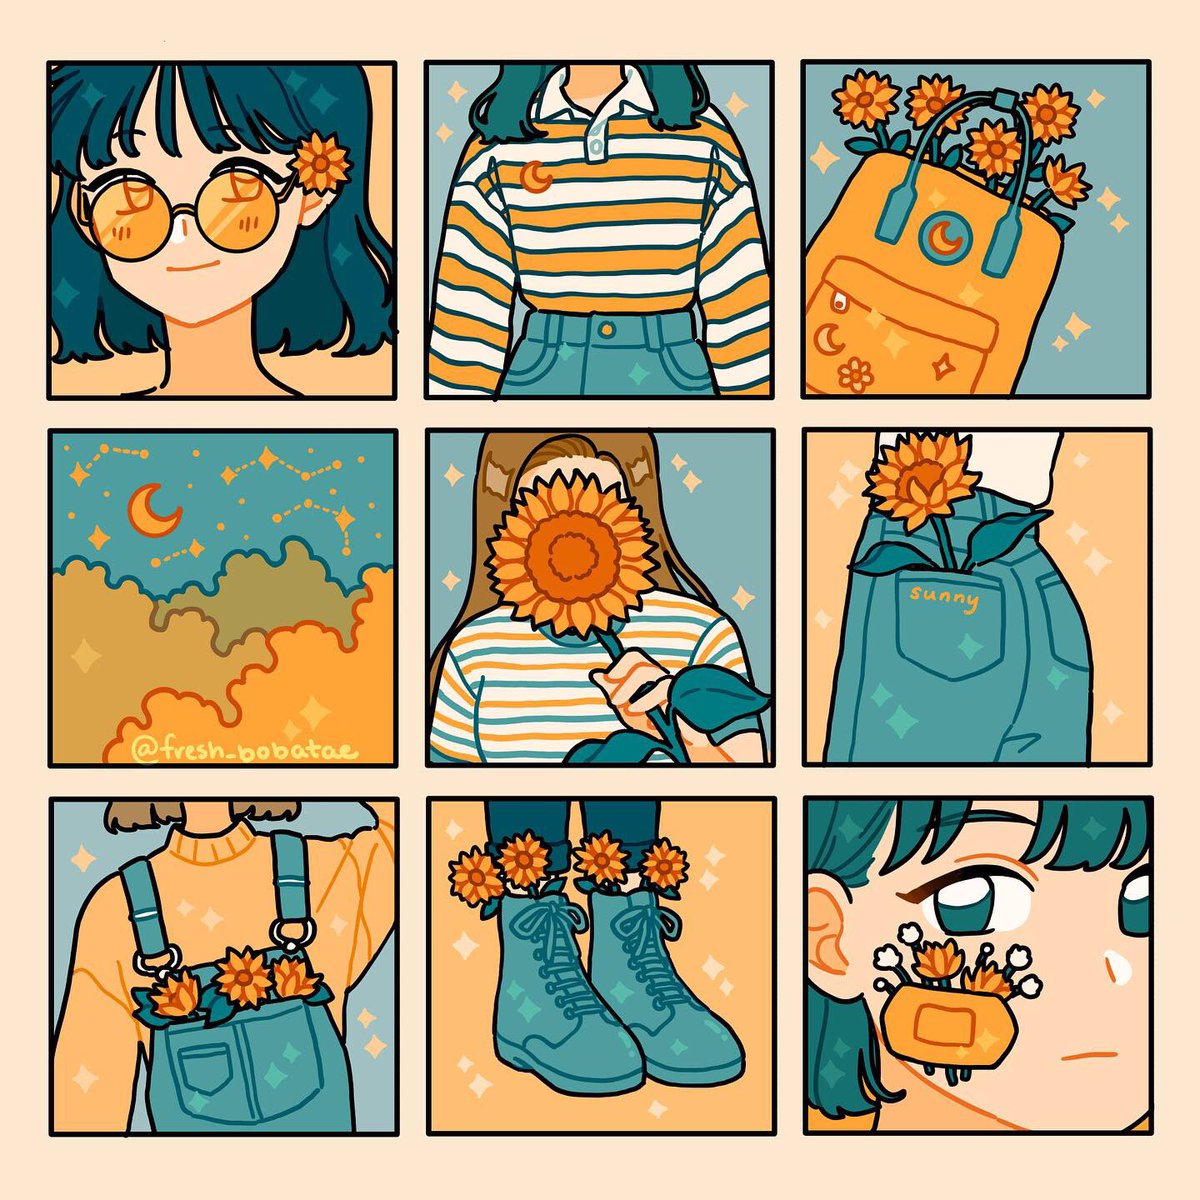 All my moodboard art ✨which theme is your favorite? 🍊🌻🖤 